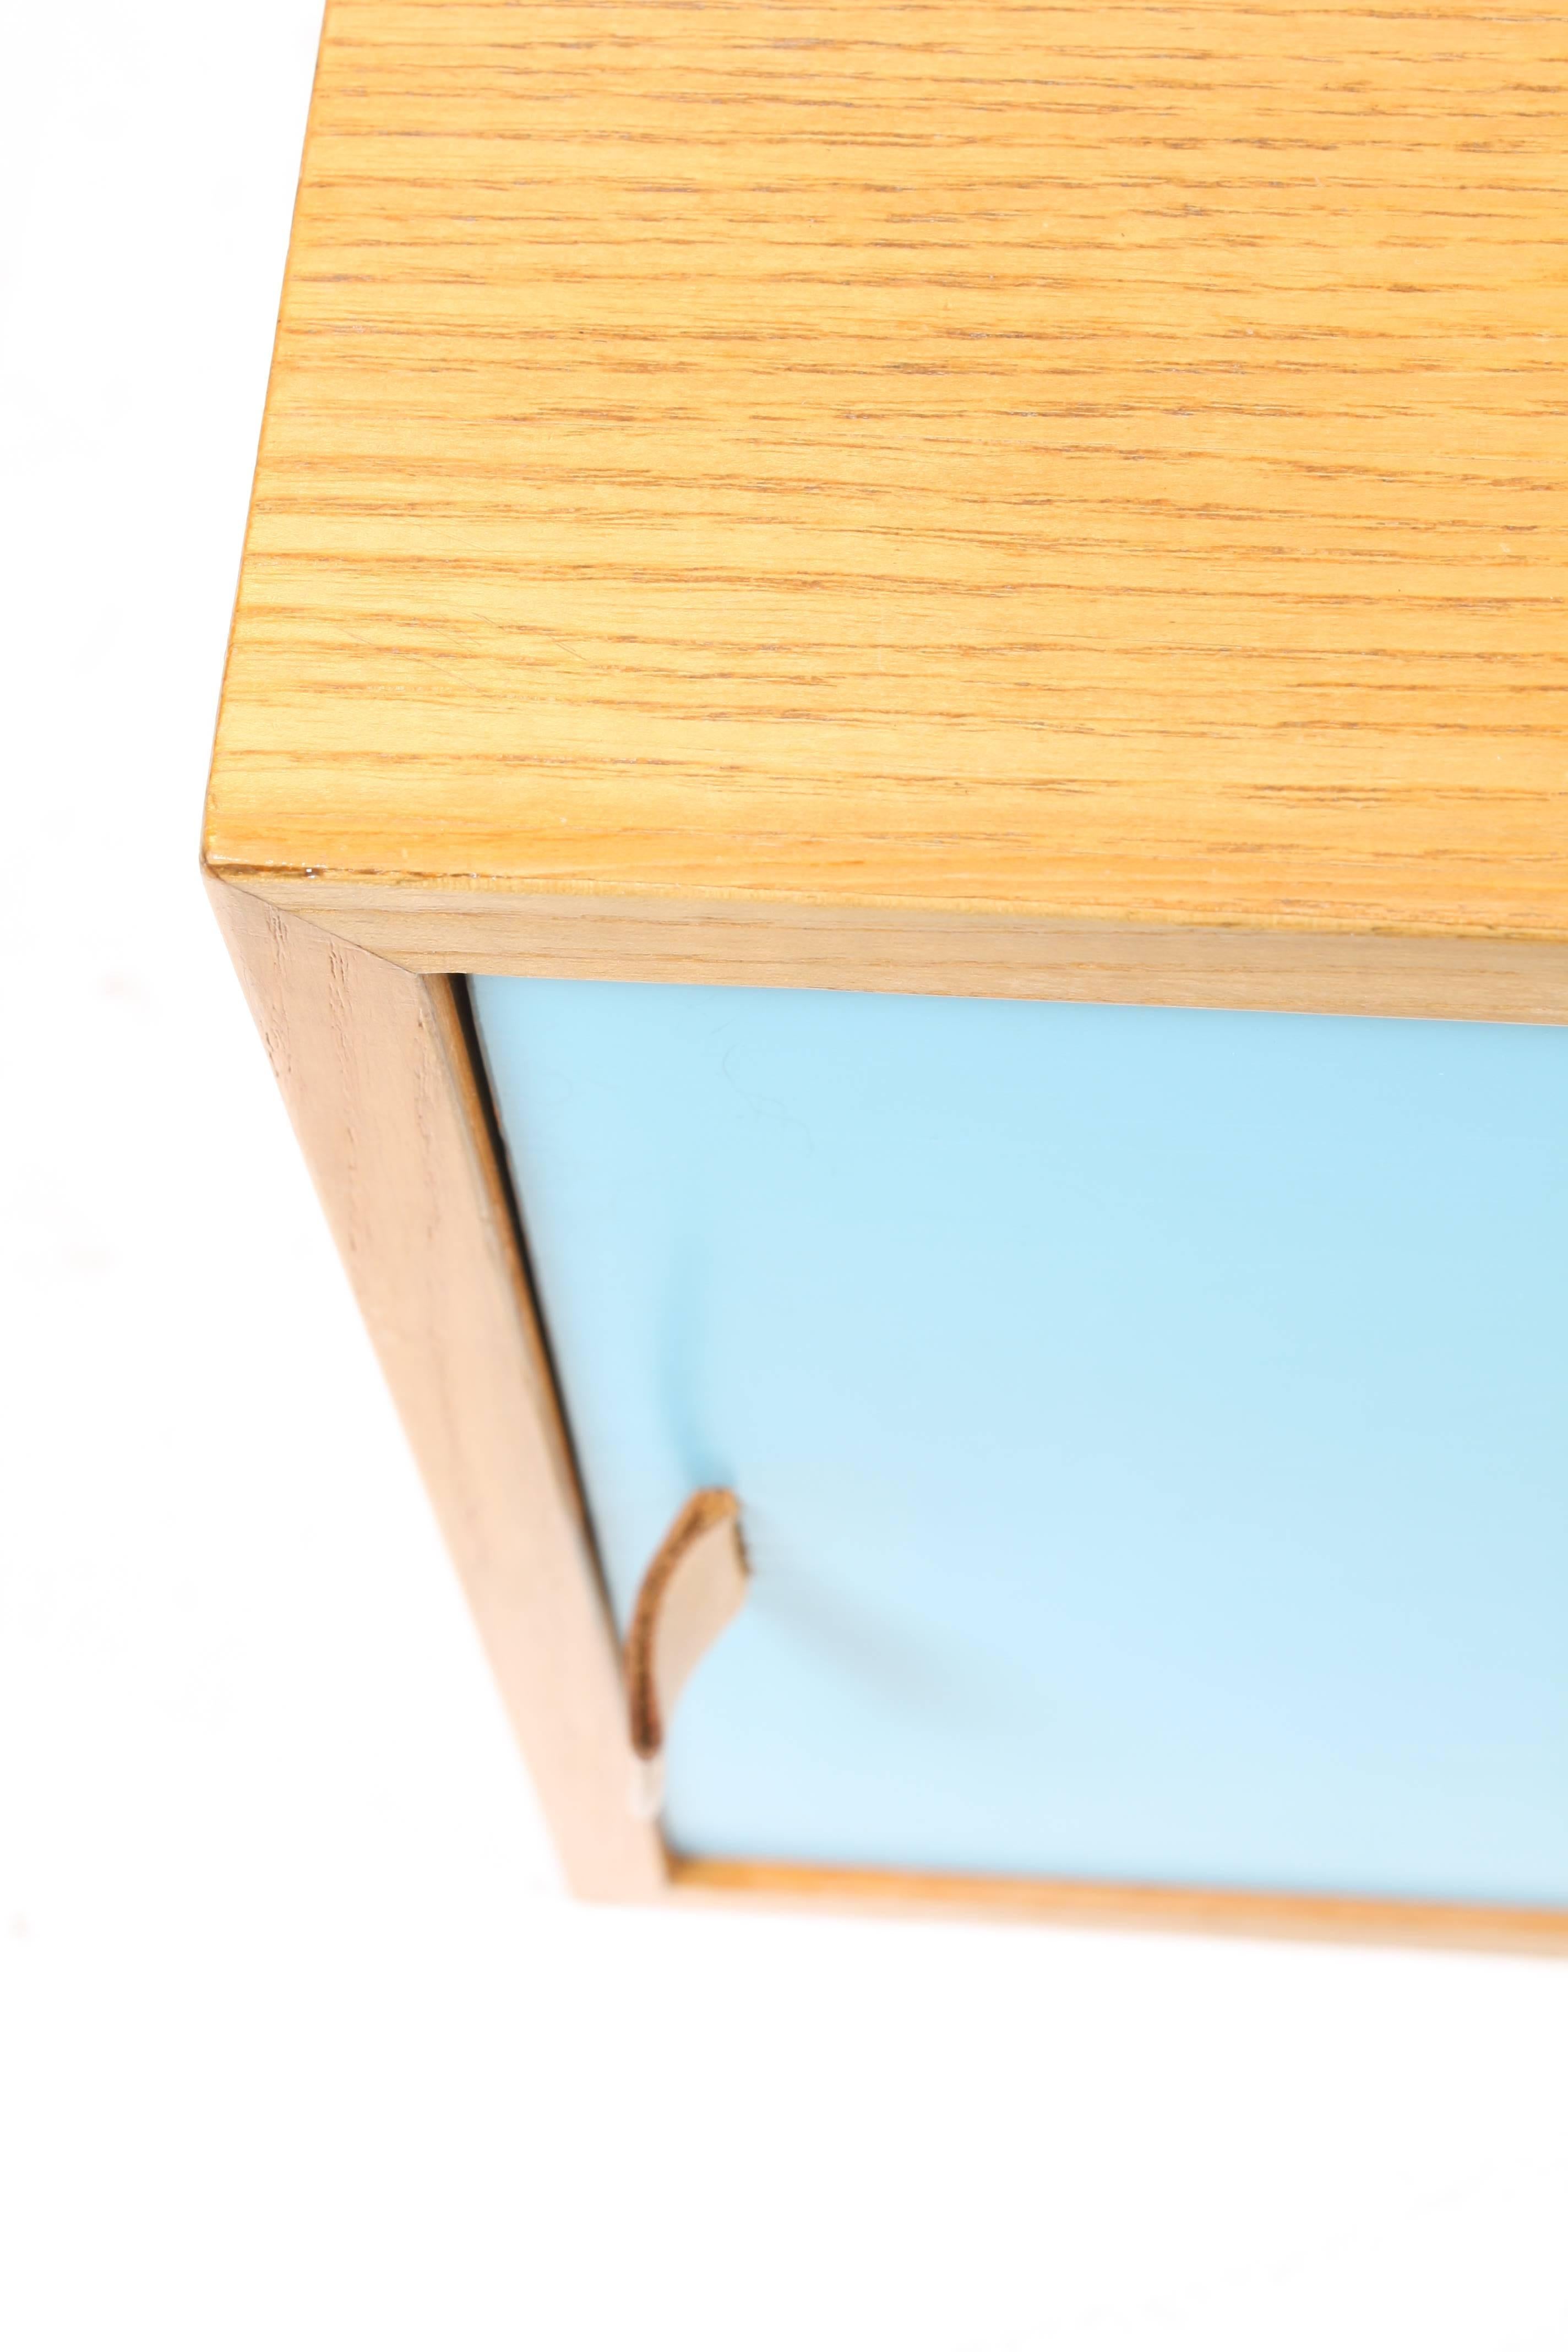 Oak Console Set with Colored Panels and Patinated leather by Danish Harbo Sølvsten